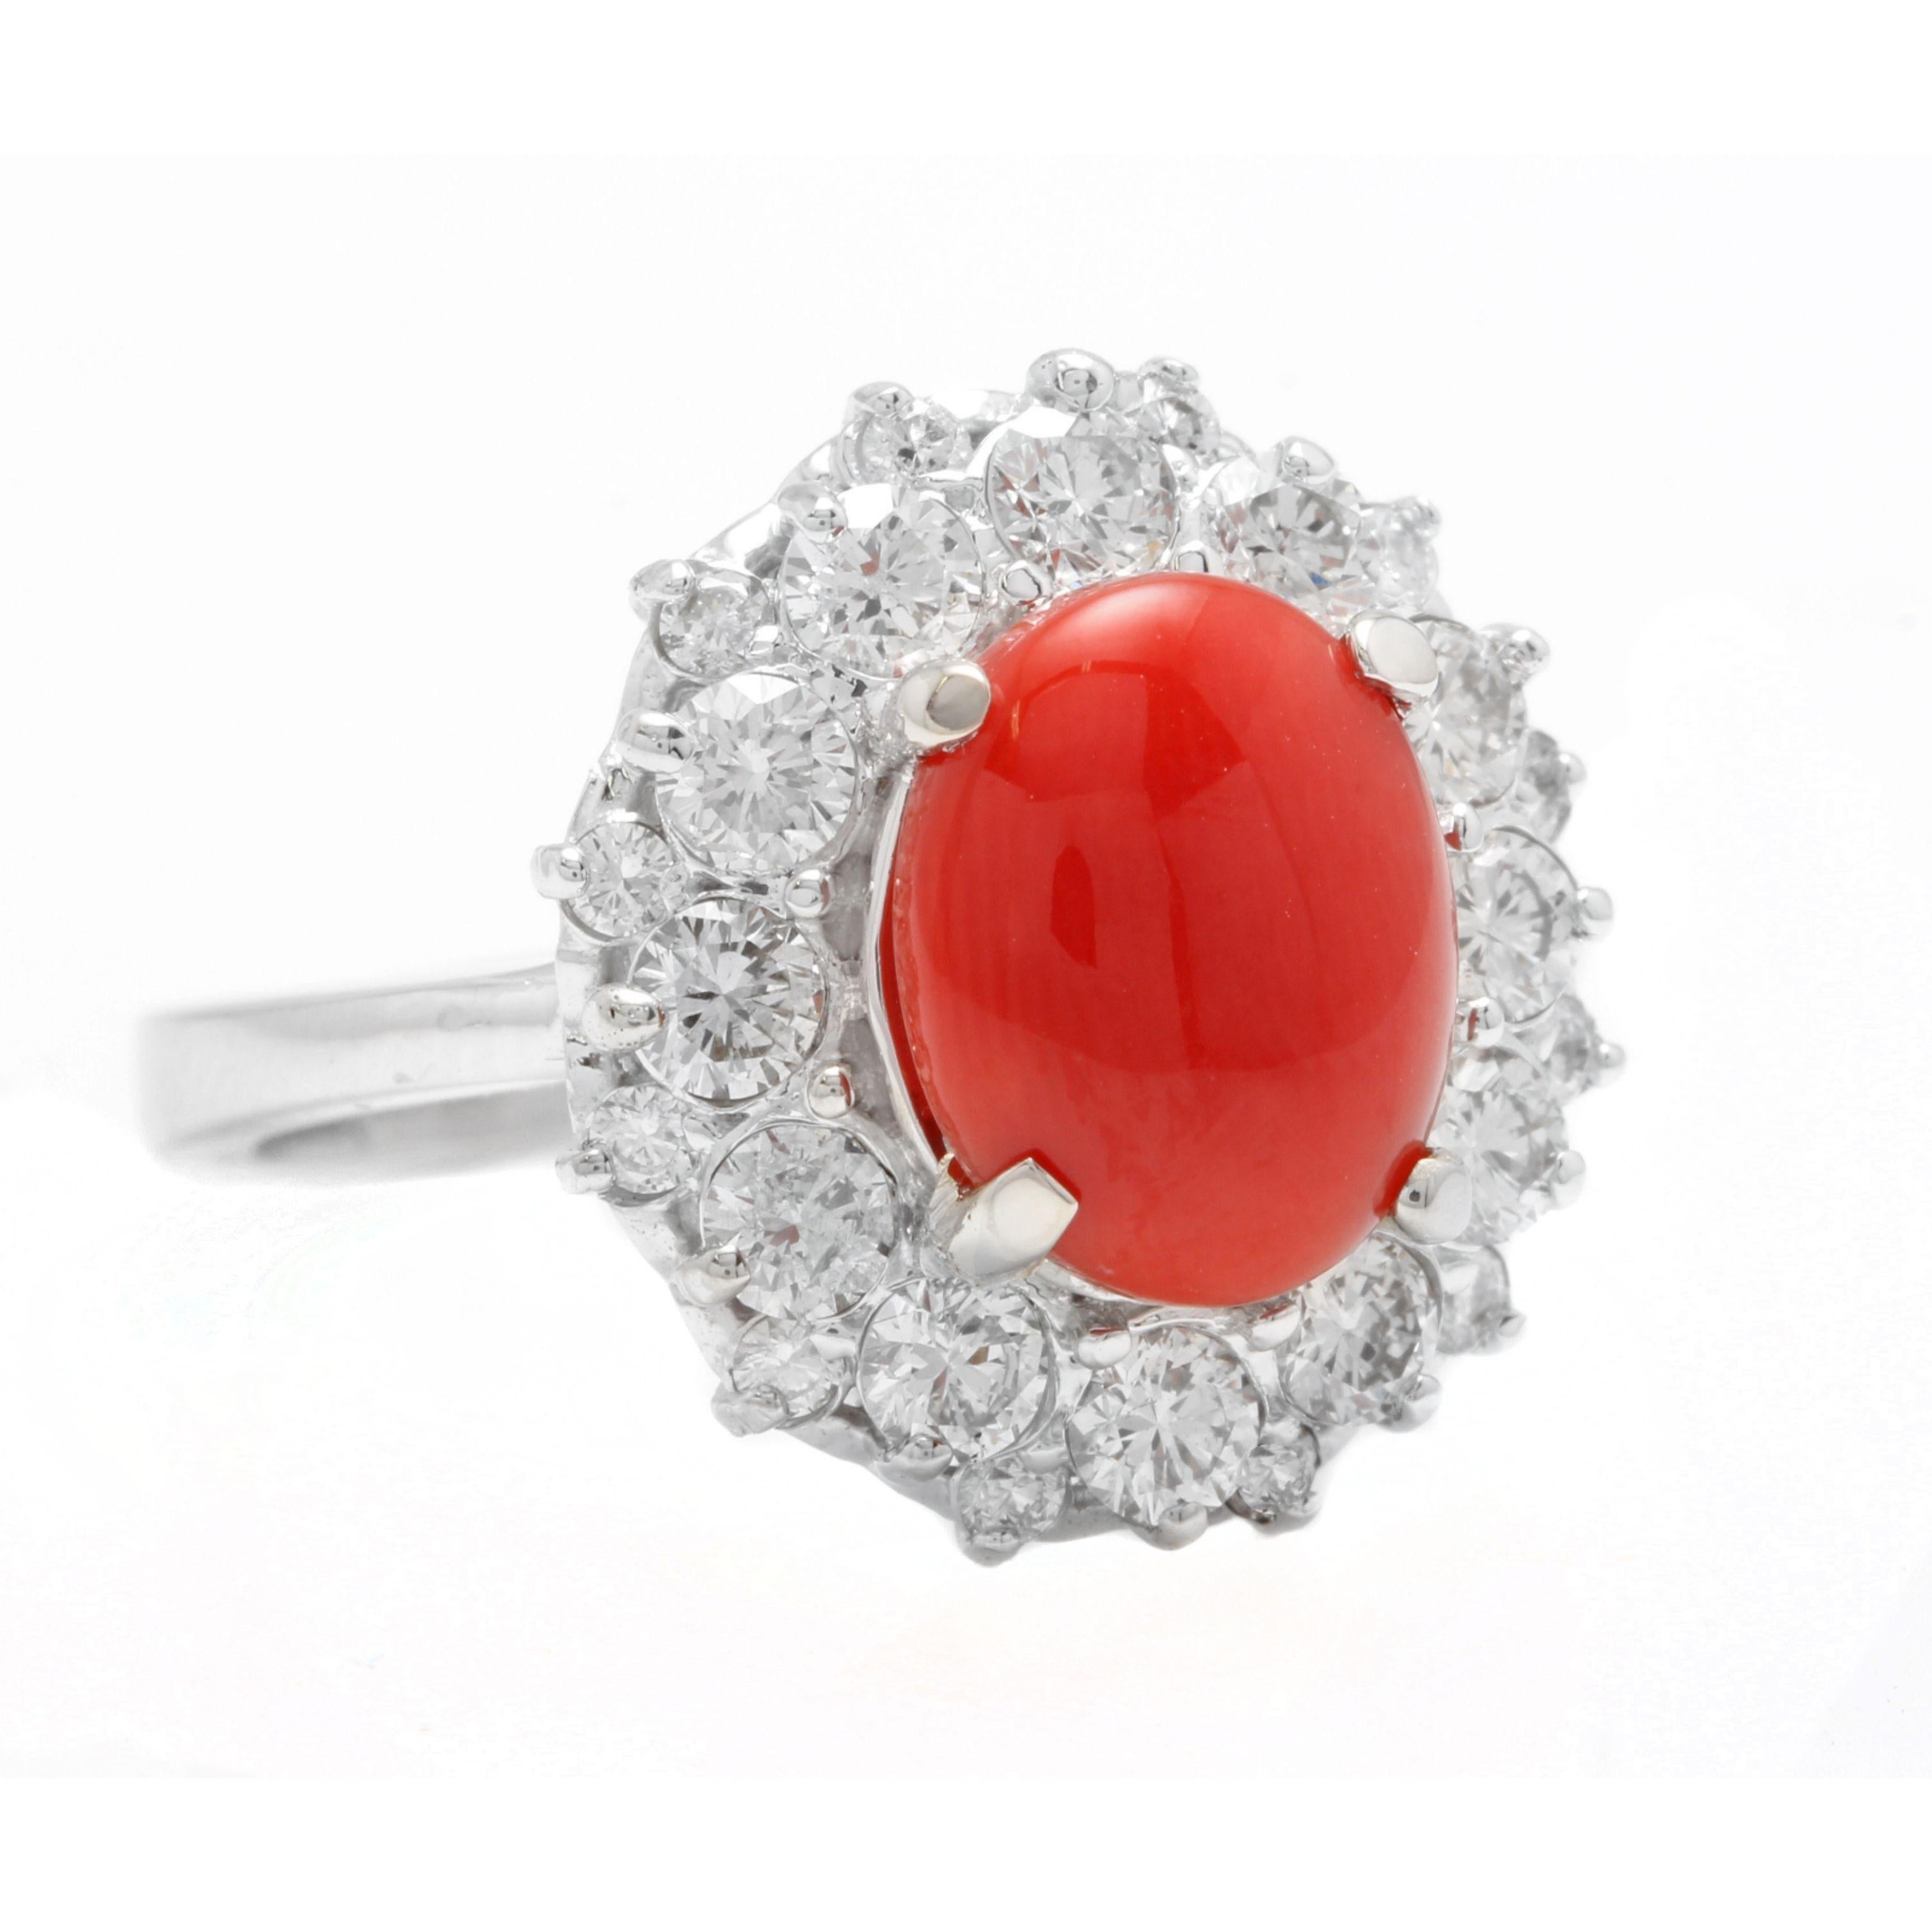 3.30 Carats Impressive Coral and Diamond 14K White Gold Ring

Total Natural Oval Coral Weight is: Approx. 2.00 Carats

Coral Measures: 10.00 x 8.00mm

Natural Round Diamonds Weight: Approx. 1.30 Carats (color G-H / Clarity SI1-SI2)

Ring size: 6.25